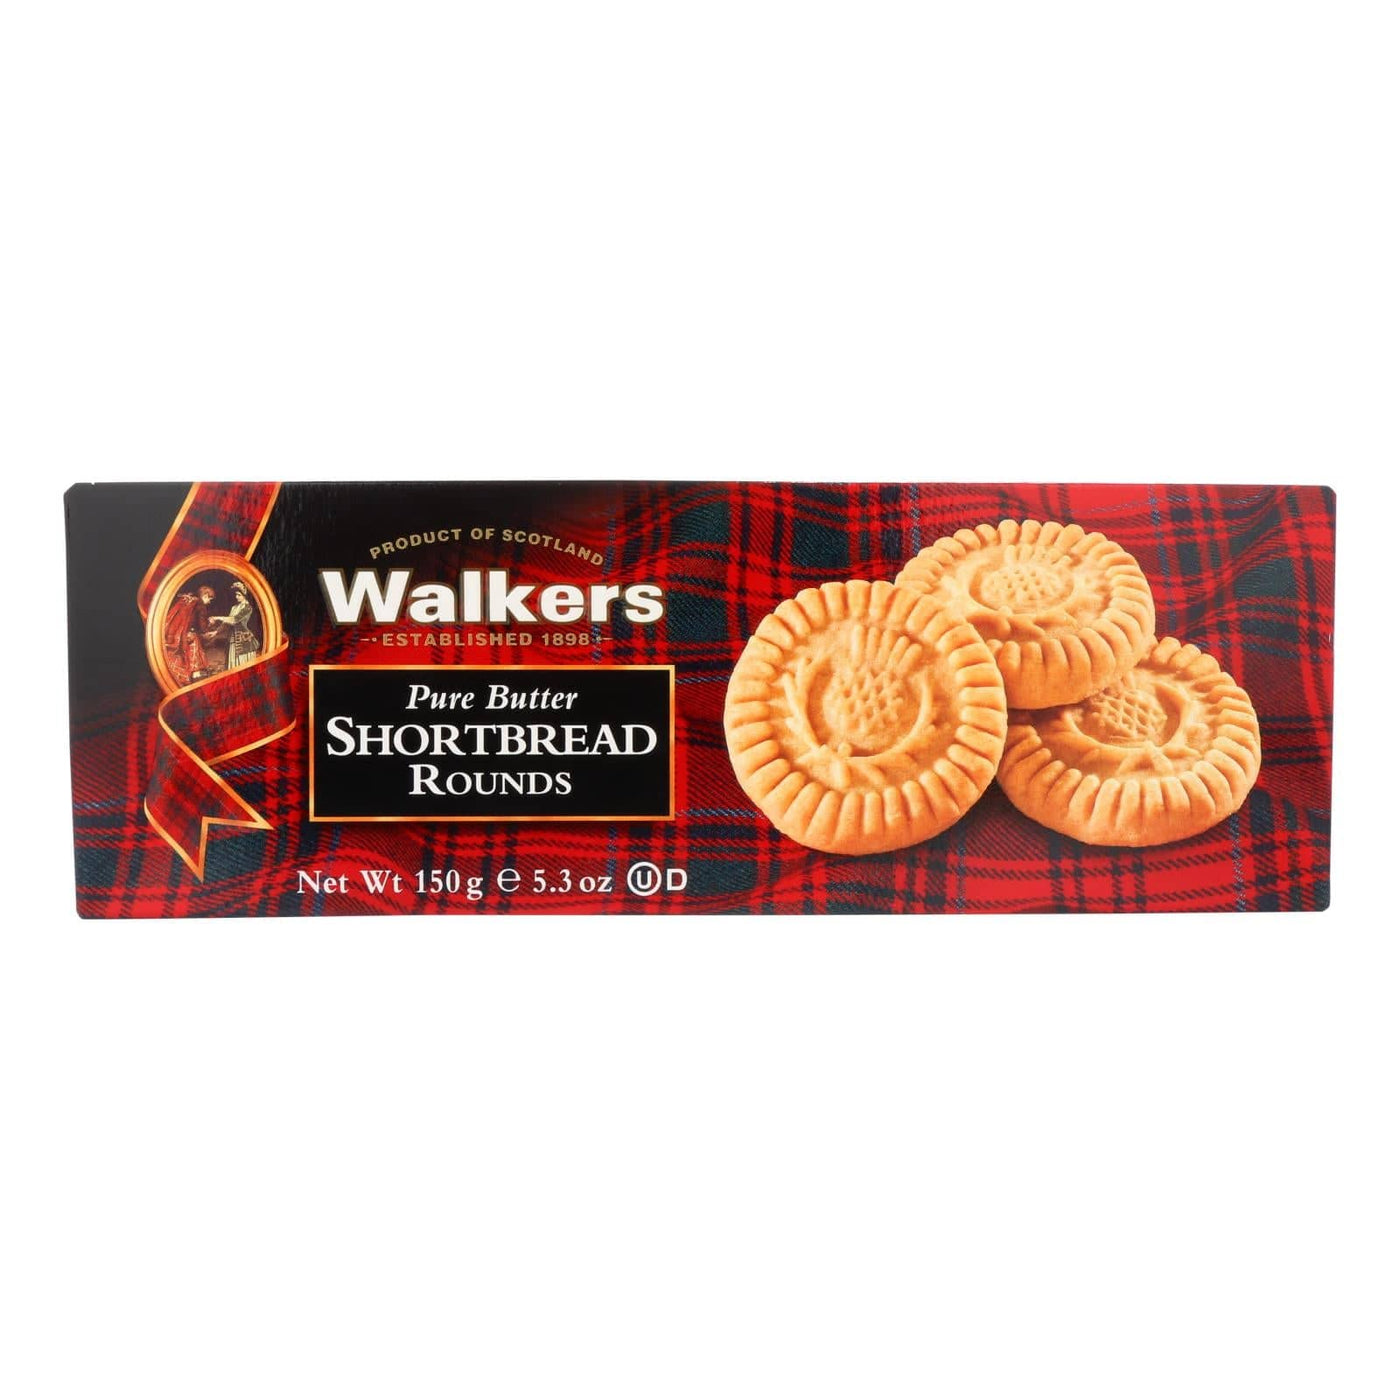 Walkers Shortbread - Pure Butter Round - Case Of 12 - 5.3 Oz. | OnlyNaturals.us